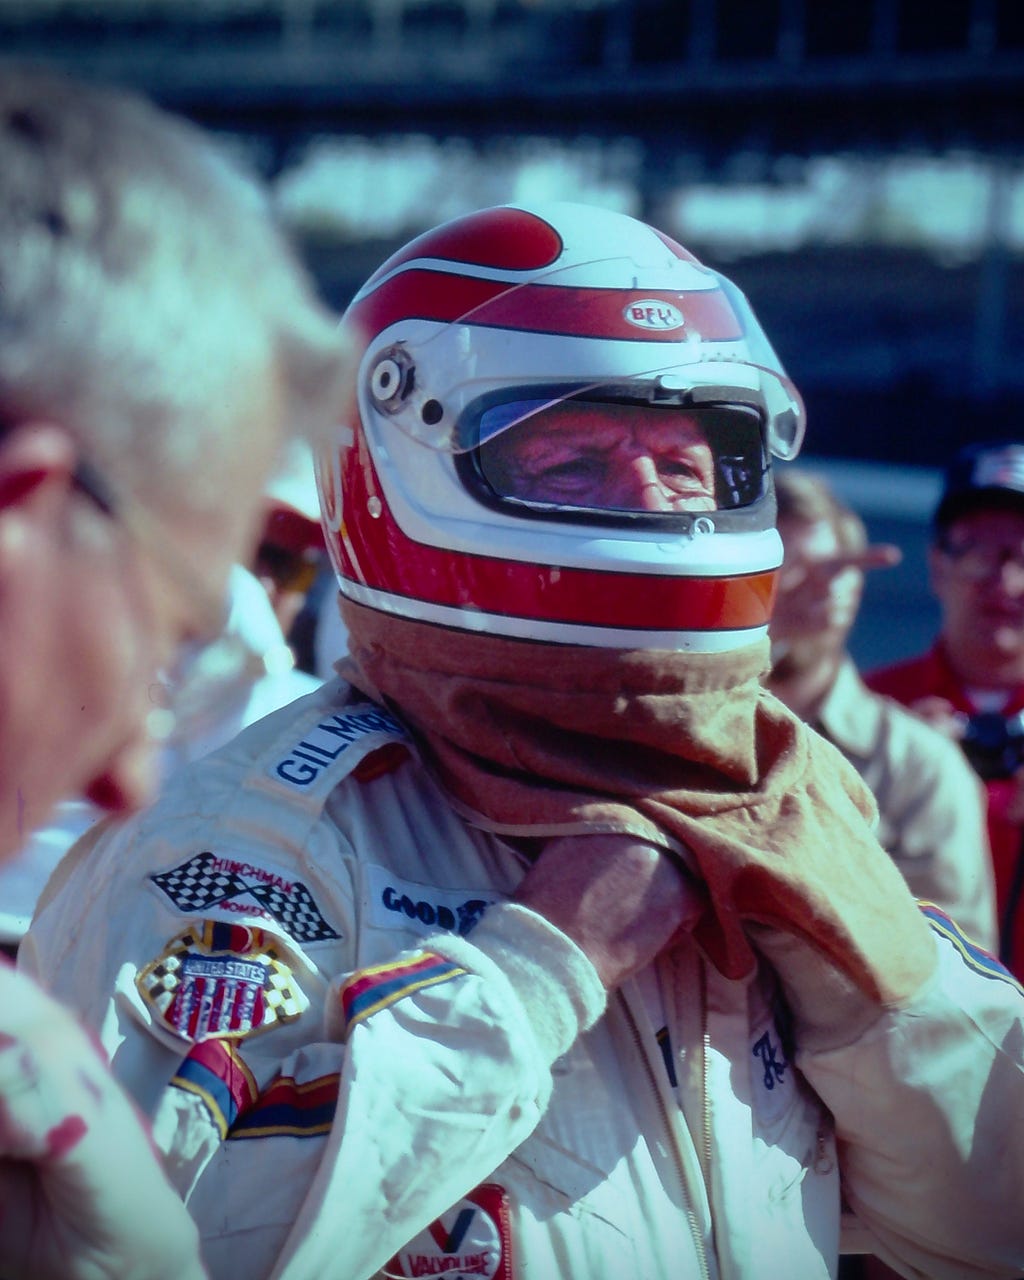 A.J. Foyt in the pits at Indy in about 1979. Photo by the author.